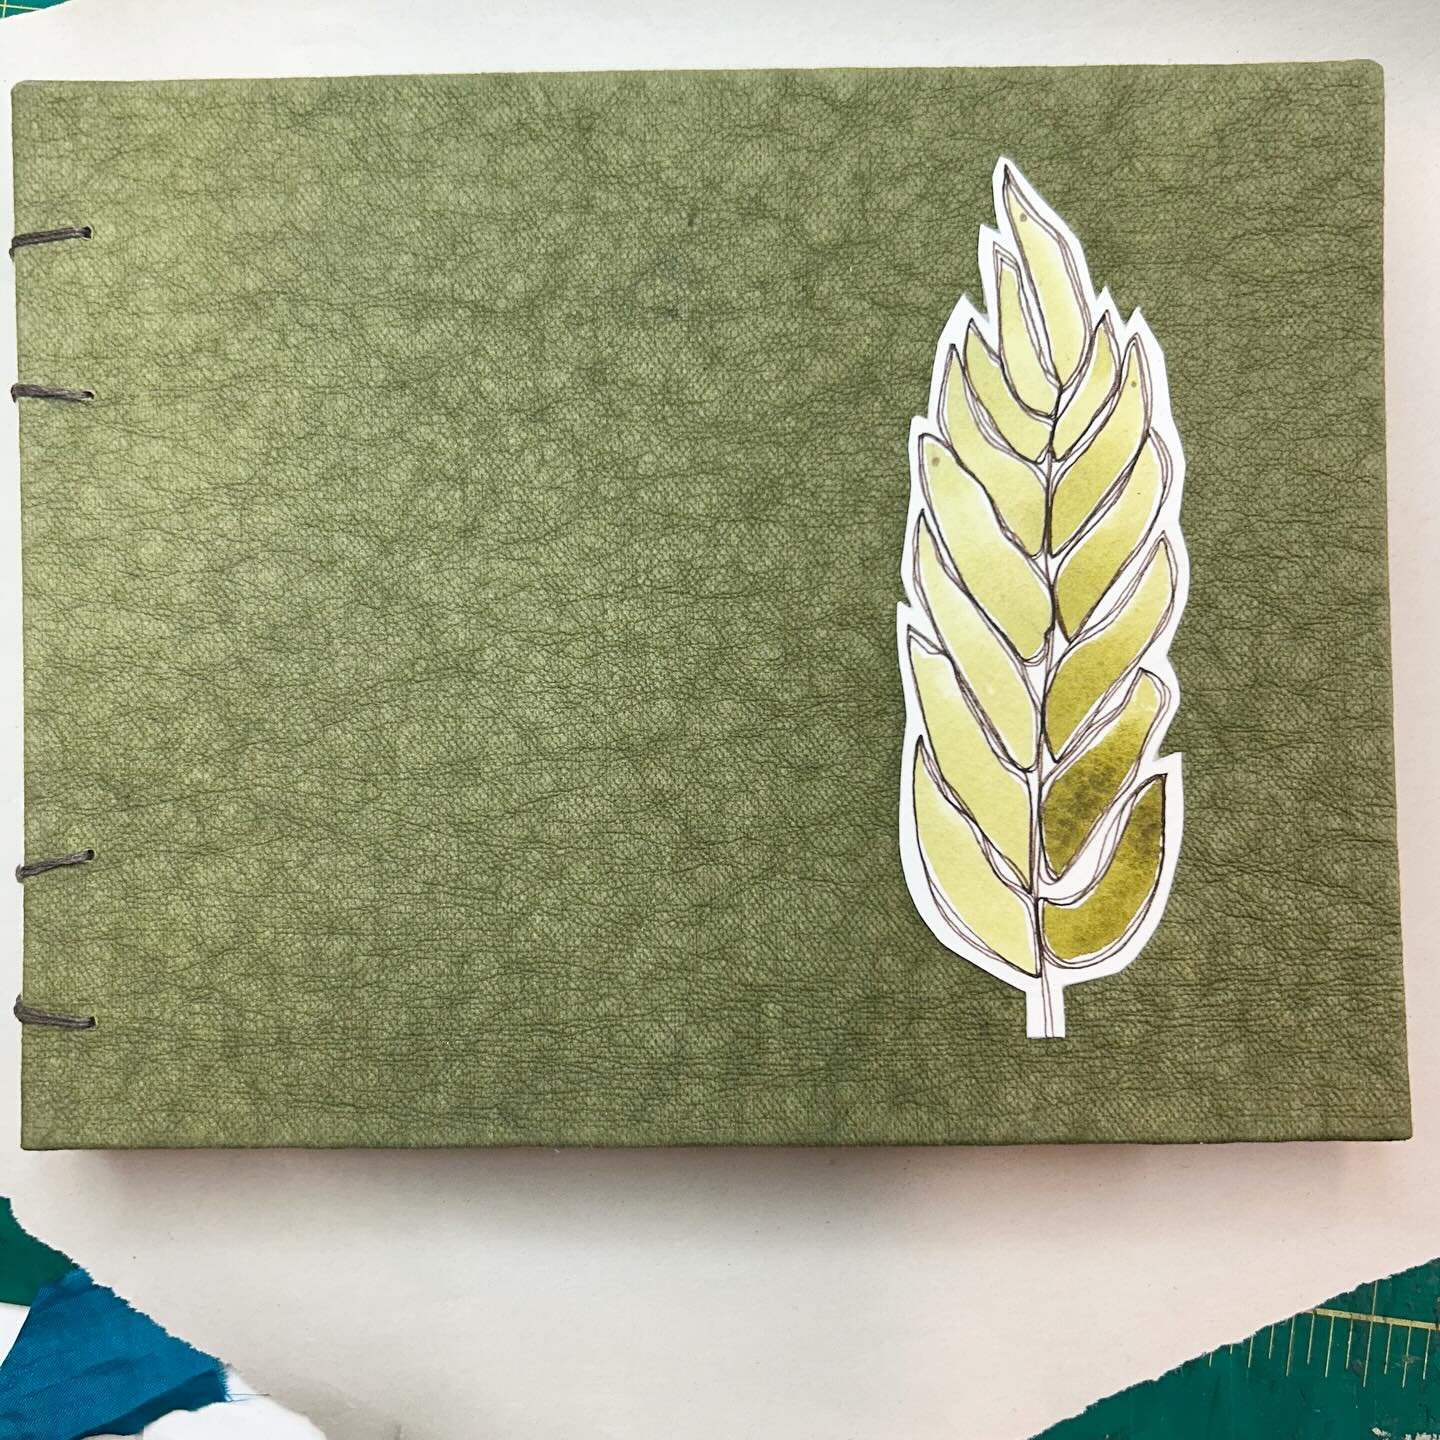 This single-sheet coptic bound watercolor journal was done a few weeks ago, but yesterday I decided it needed an embellishment on the cover. The inside pages are luscious cotton paper from India that takes watercolor beautifully. 

#handmadebook #han